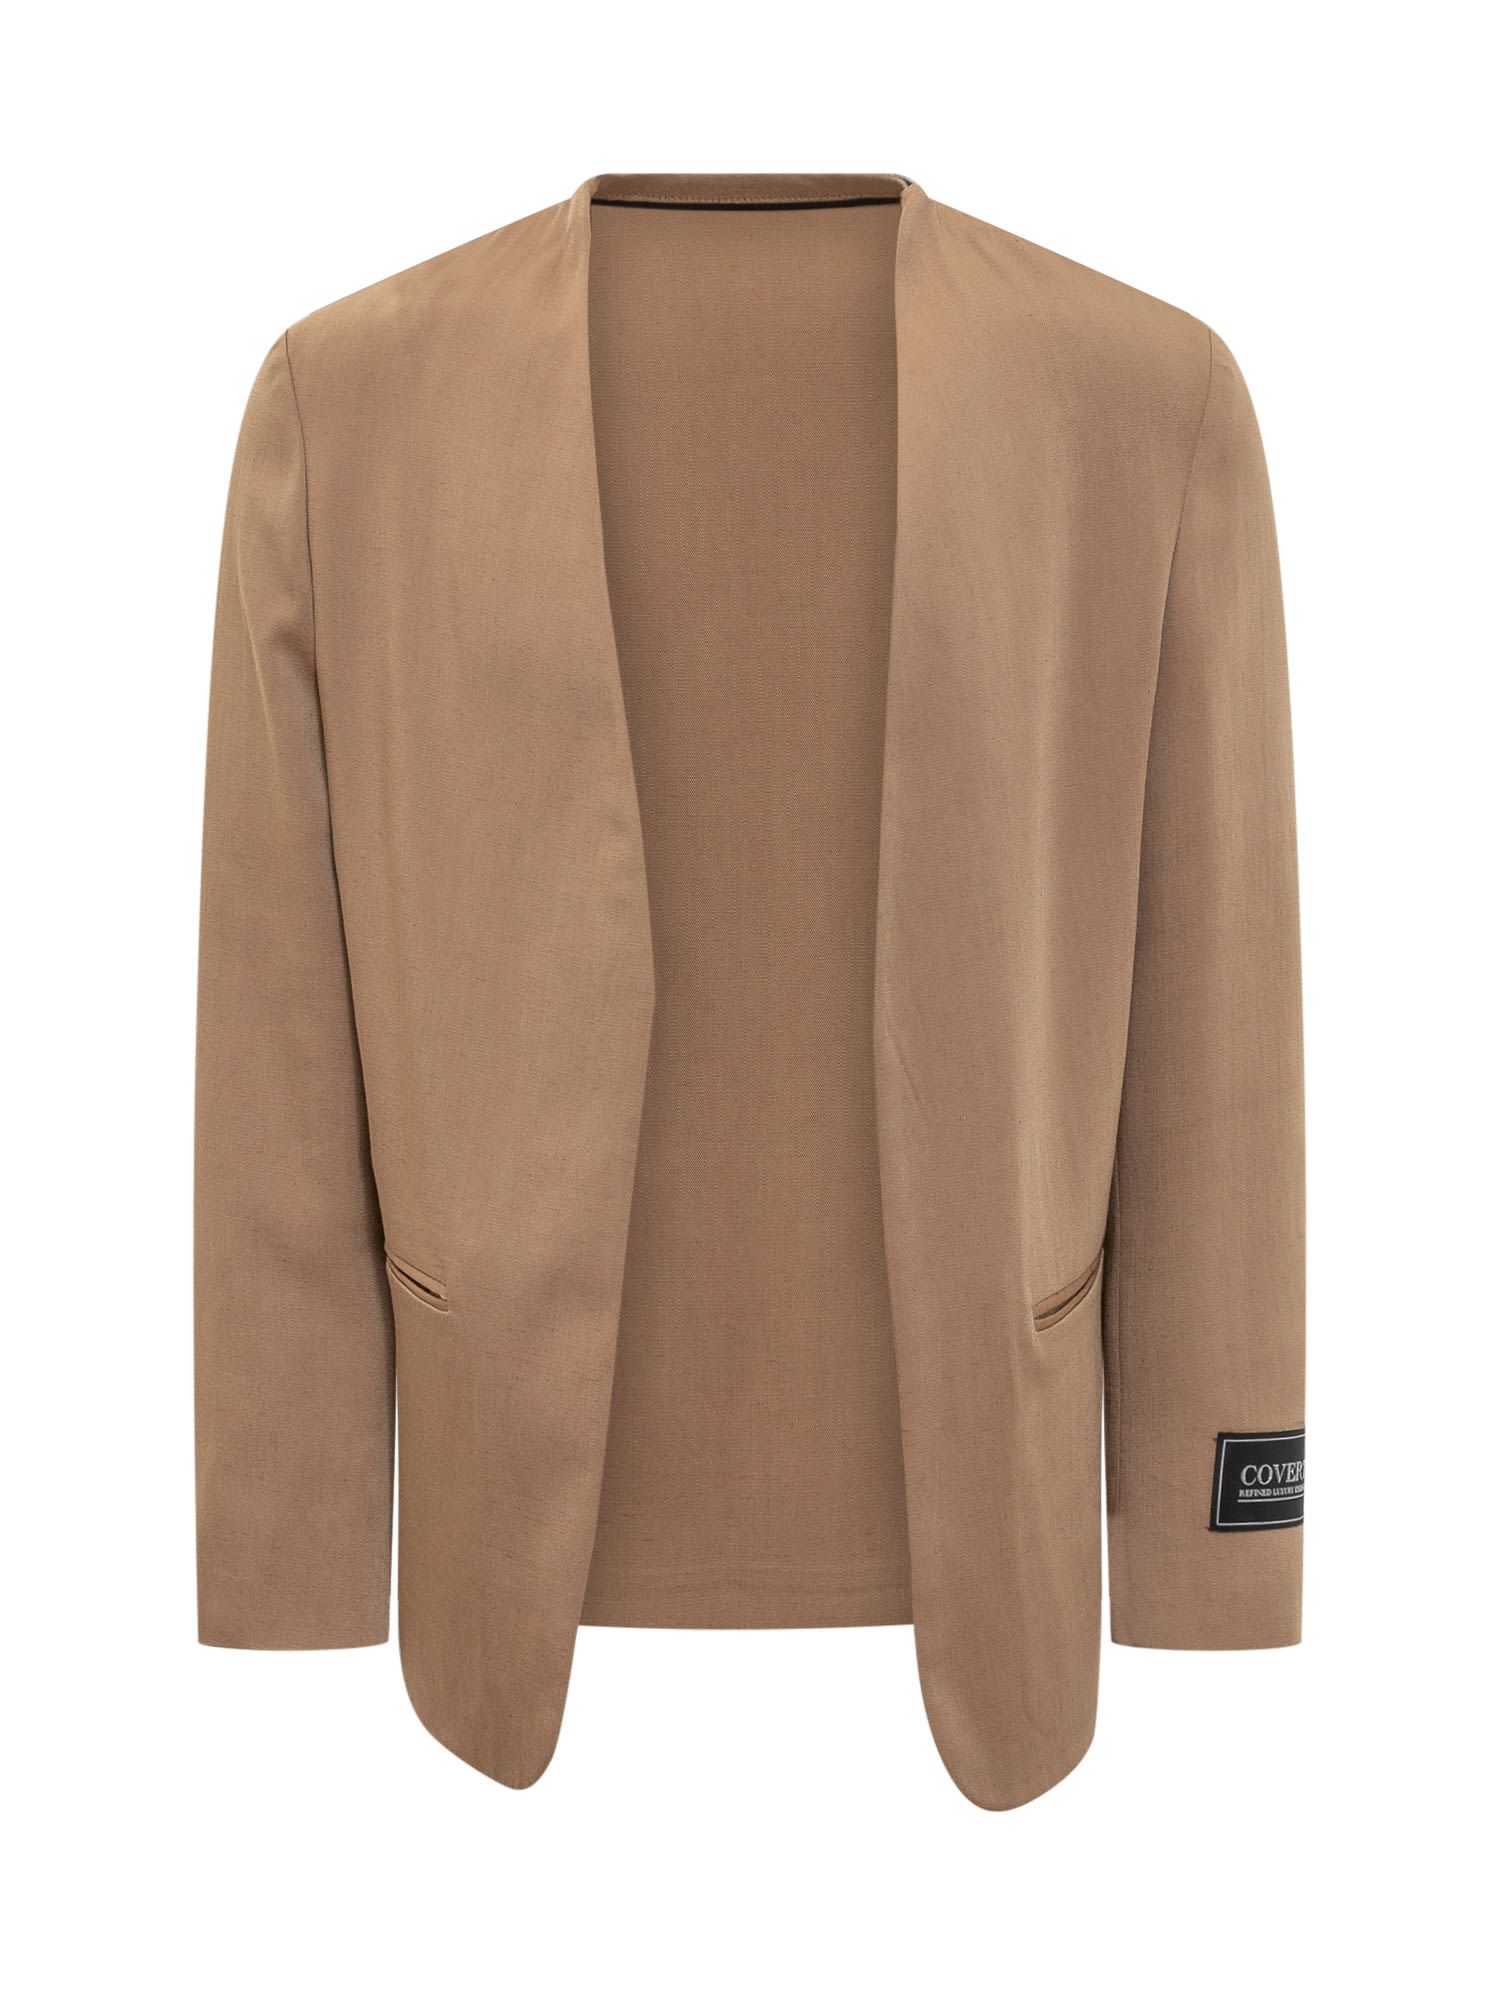 Covert Blazer Open At The Front